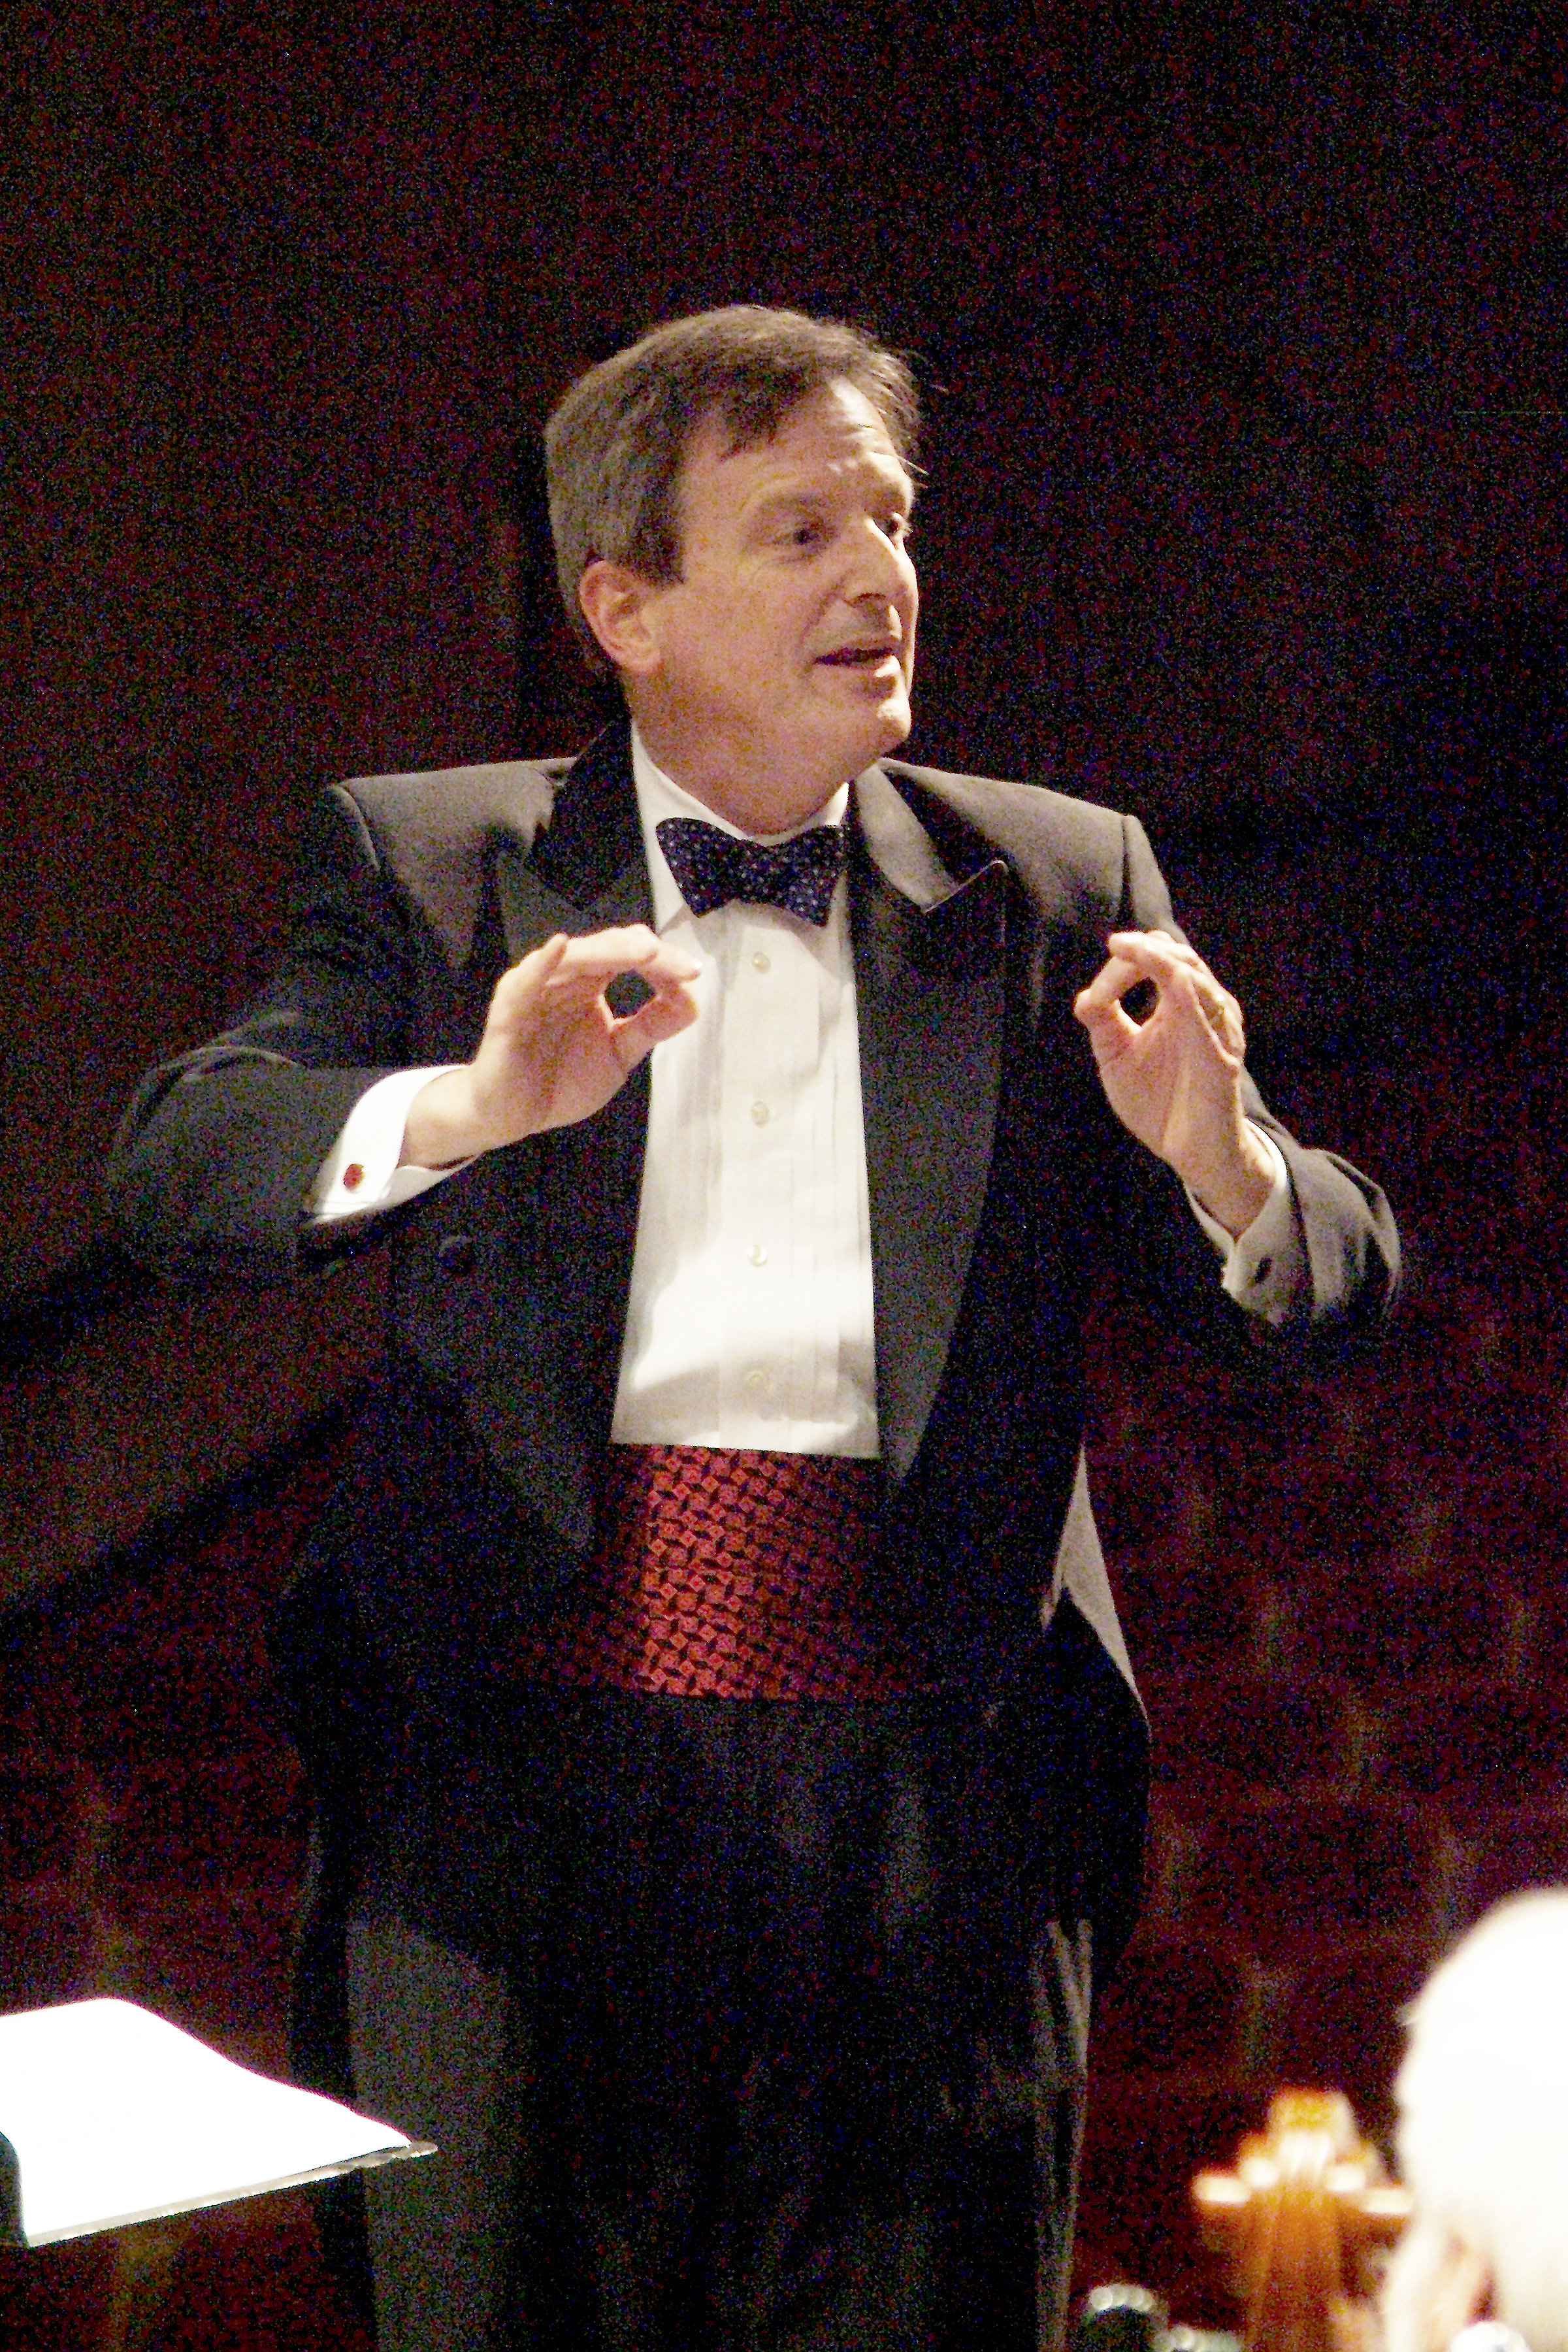 Adam Stern conducts the Port Angeles Symphony in this 2012 photo.